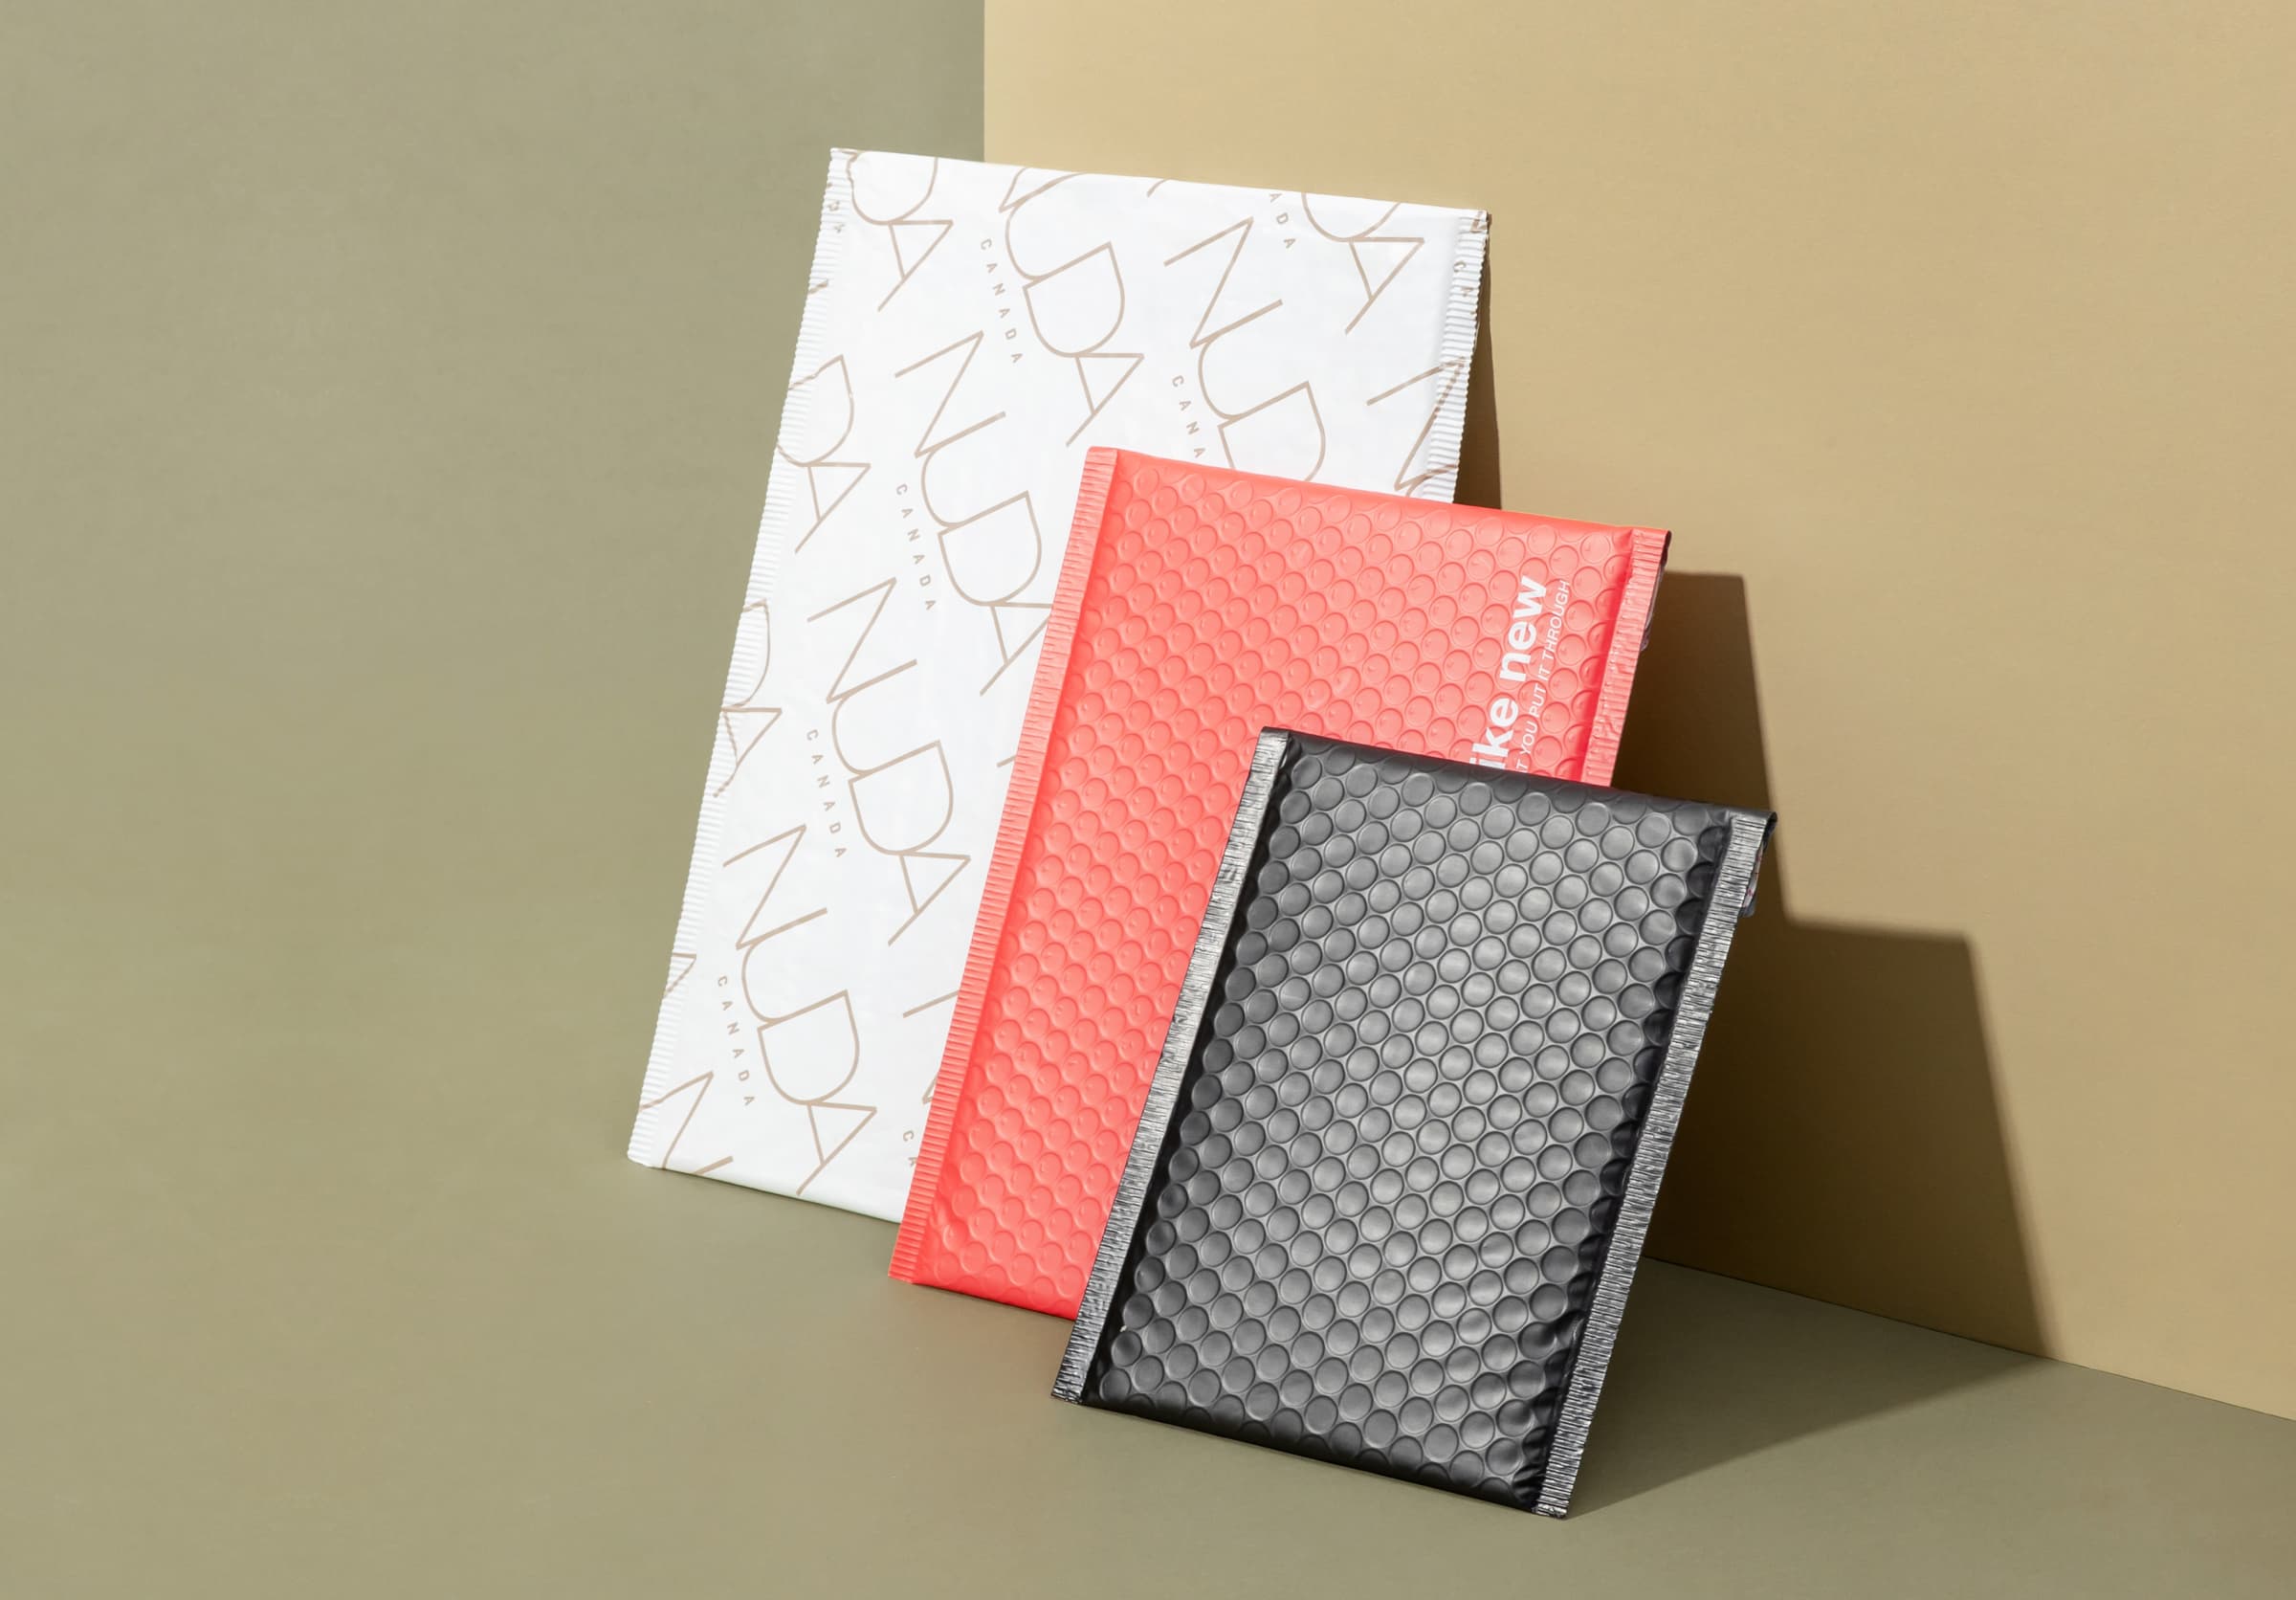 Poly and paper mailer examples for flexible packaging.